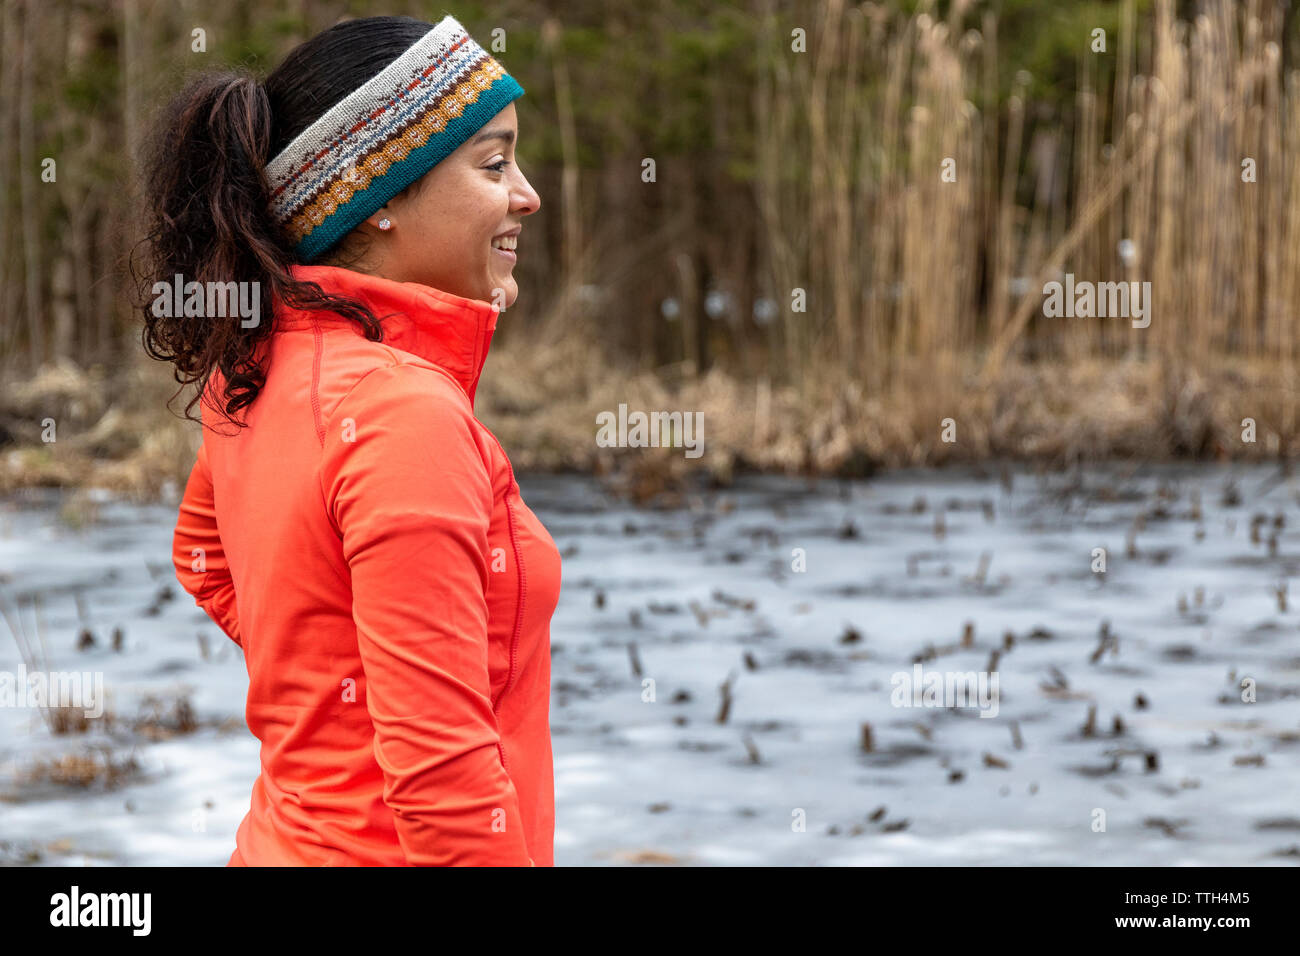 Woman in the outdoors enjoying nature and smiling on a autumn day Stock Photo